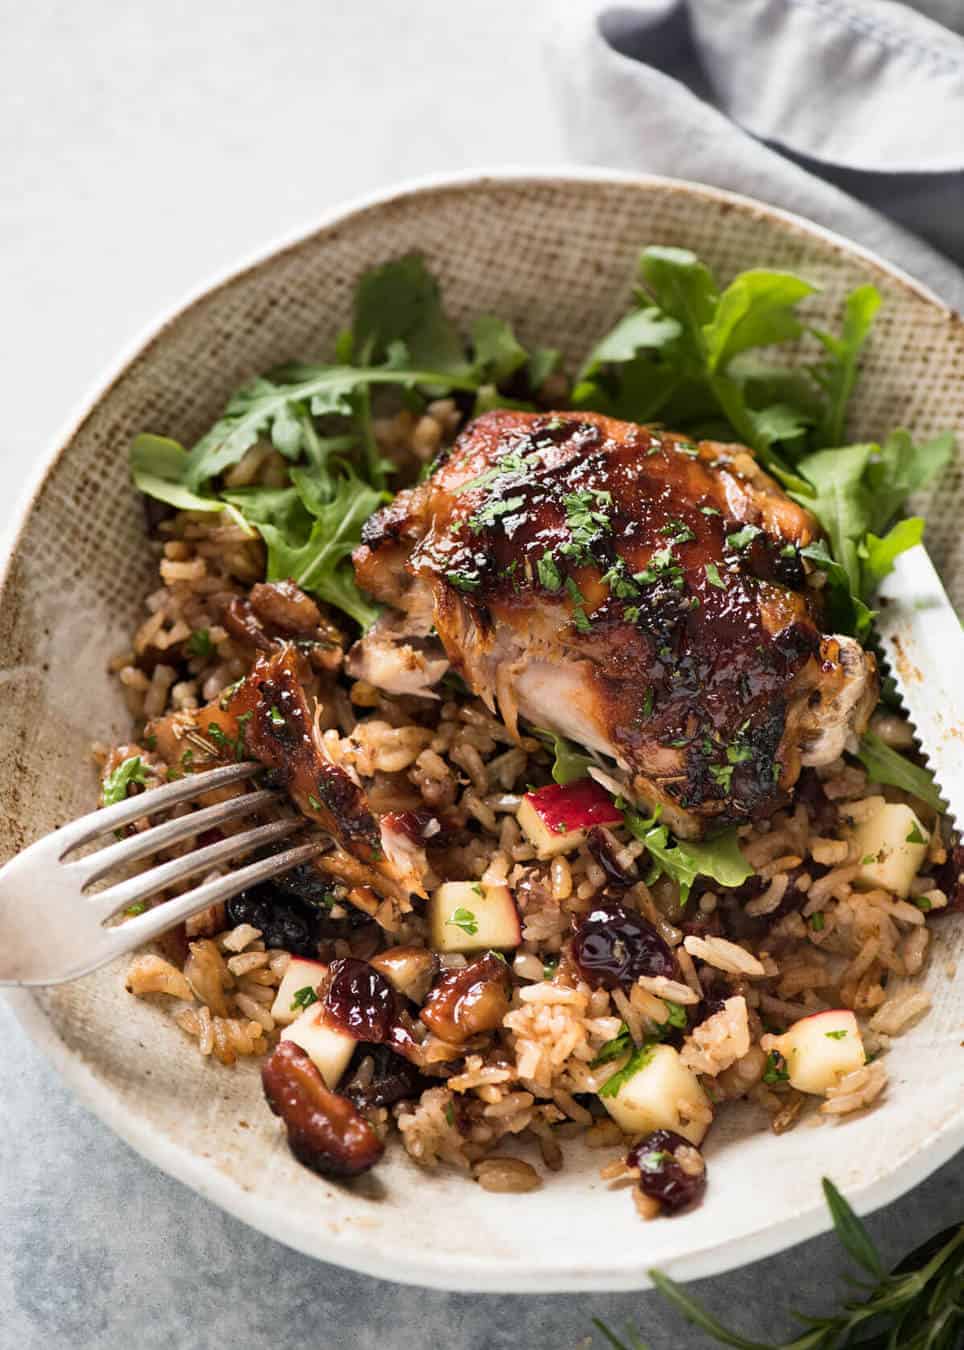 A flavour loaded one-pan, quick midweek dinner - Baked Chicken and Rice Pilaf with Cranberries, Walnuts and Apple. The smell when this is cooking is amazing! www.recipetineats.com